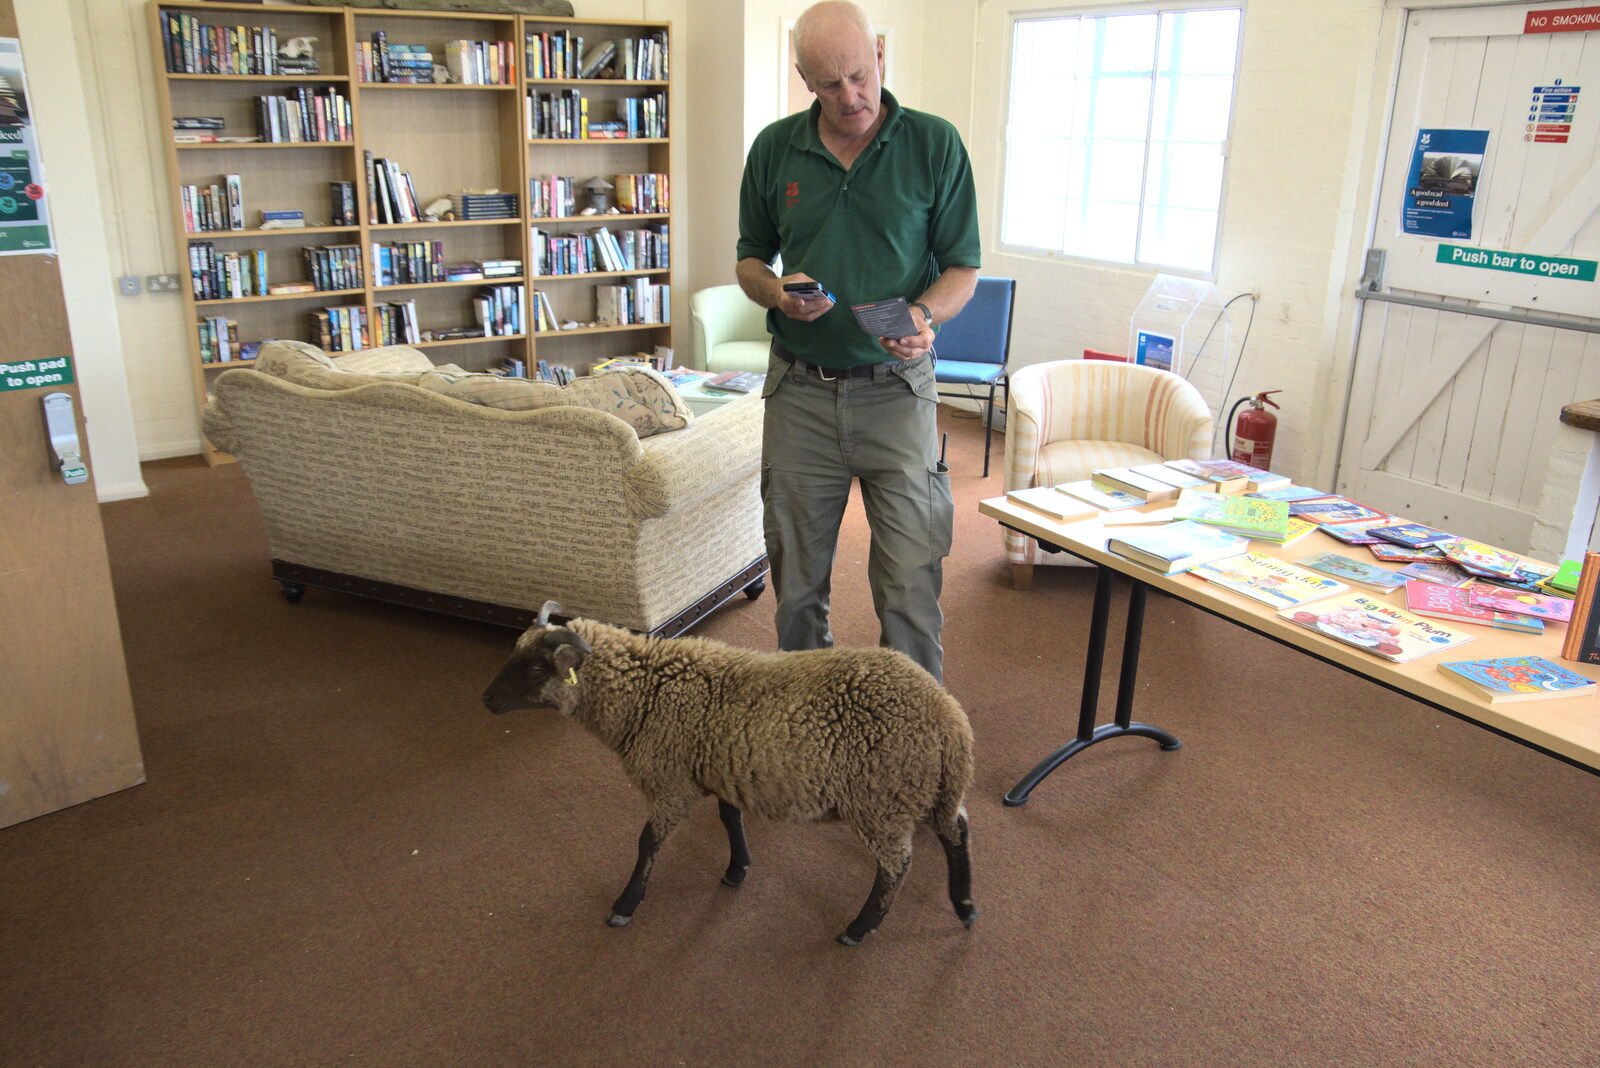 A sheep visits the book shop from A Trip to Orford Ness, Orford, Suffolk - 16th August 2022